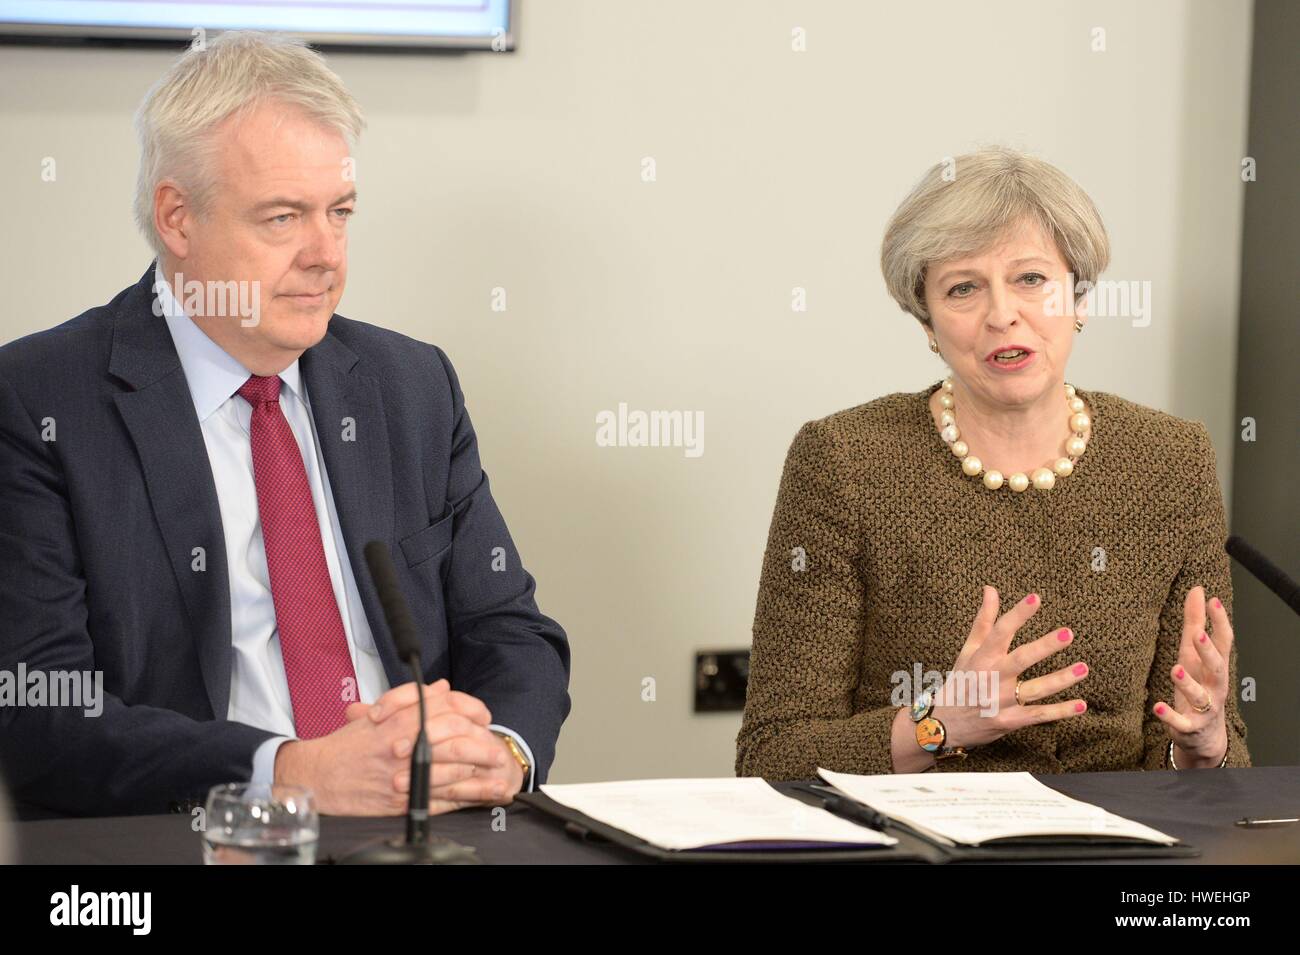 Prime Minister Theresa May (right) and First Minister Carwyn Jones during a bilateral meeting at the Liberty Stadium in Swansea, as she faces pressure to keep the union together in the wake of the divisive Brexit vote. Stock Photo